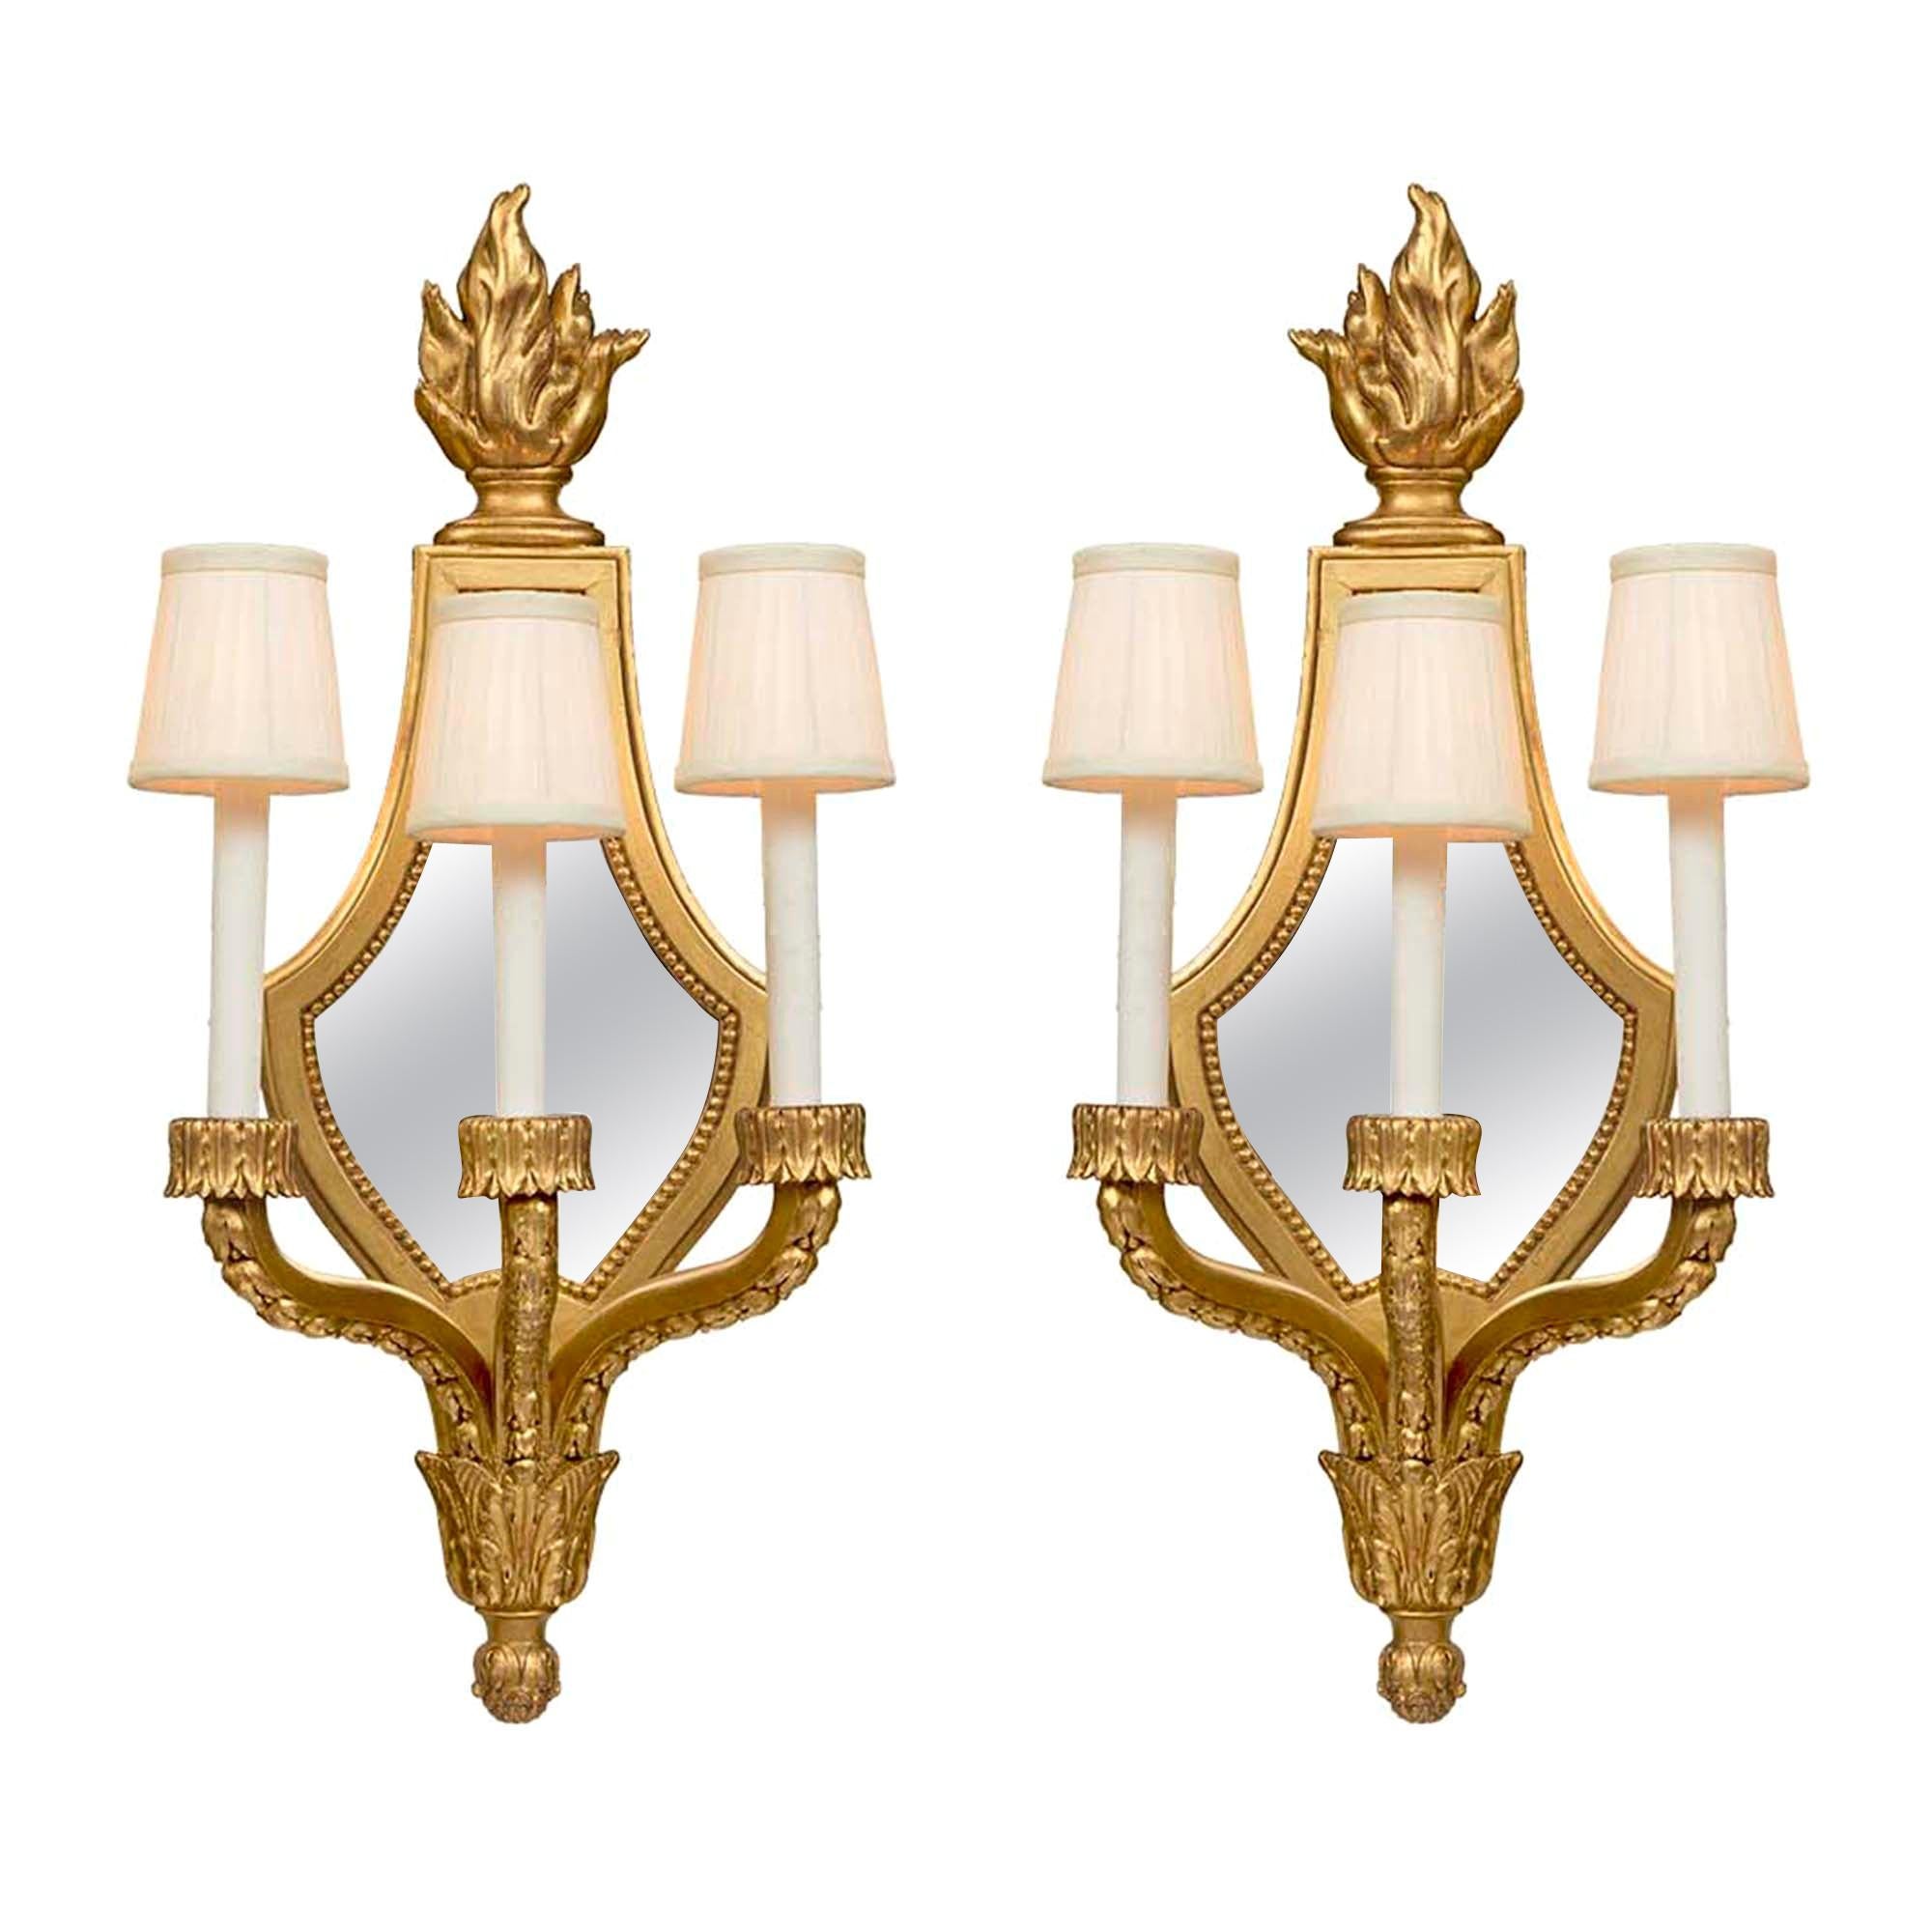 Pair of French 19th Century Louis XVI Style Giltwood Mirrored Sconces For Sale